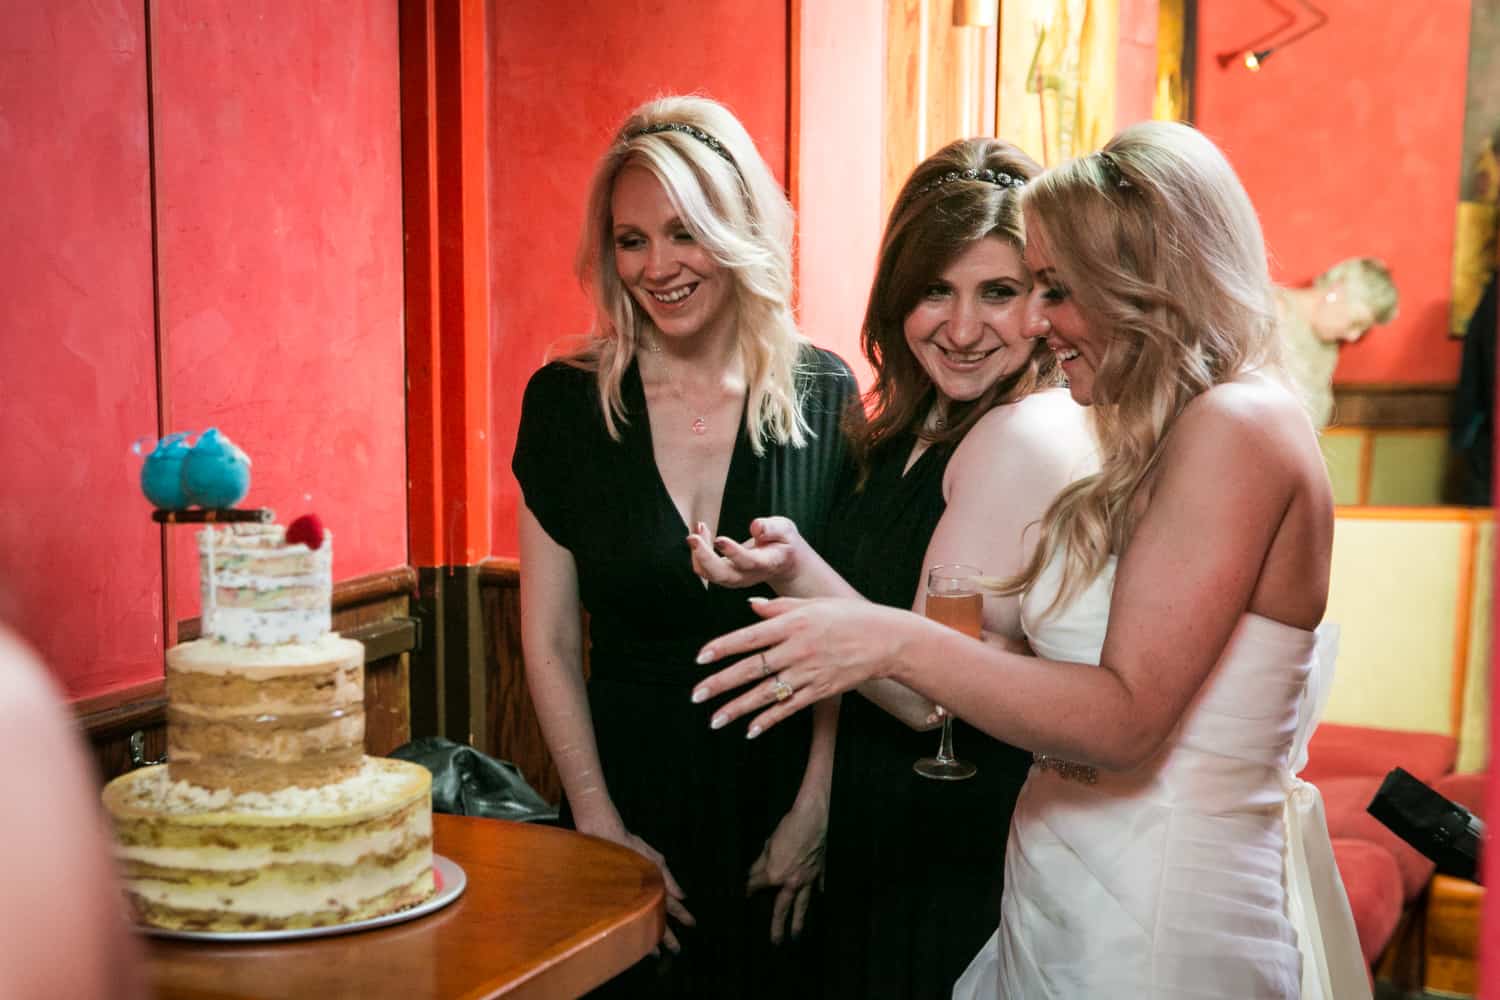 Bride showing off cake to female guests at a Bergdorf Goodman wedding reception